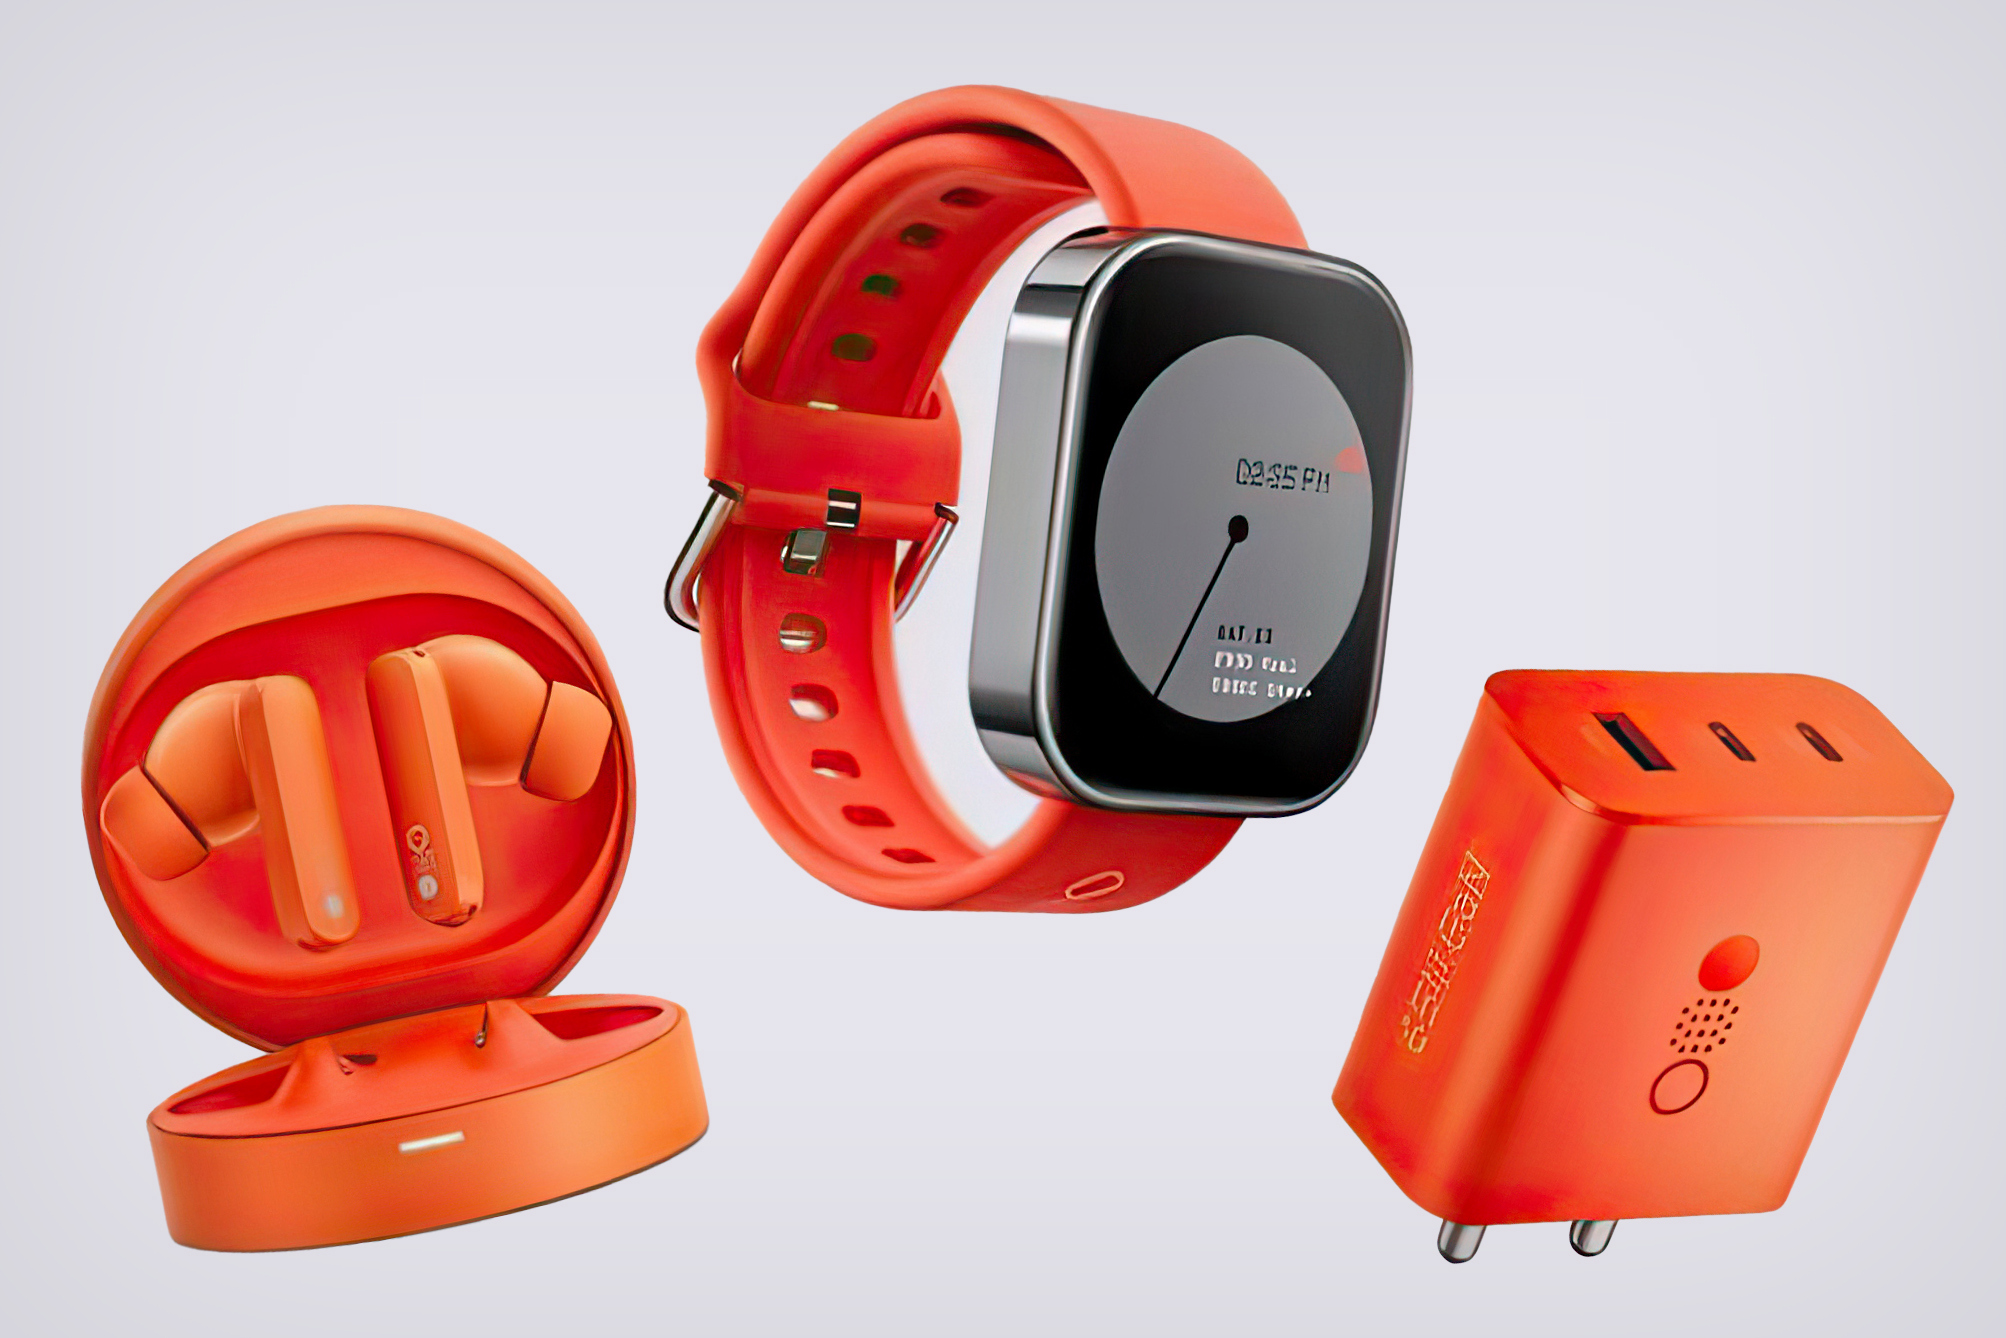 Images of New CMF by Nothing Smartwatch and Earbuds Leak